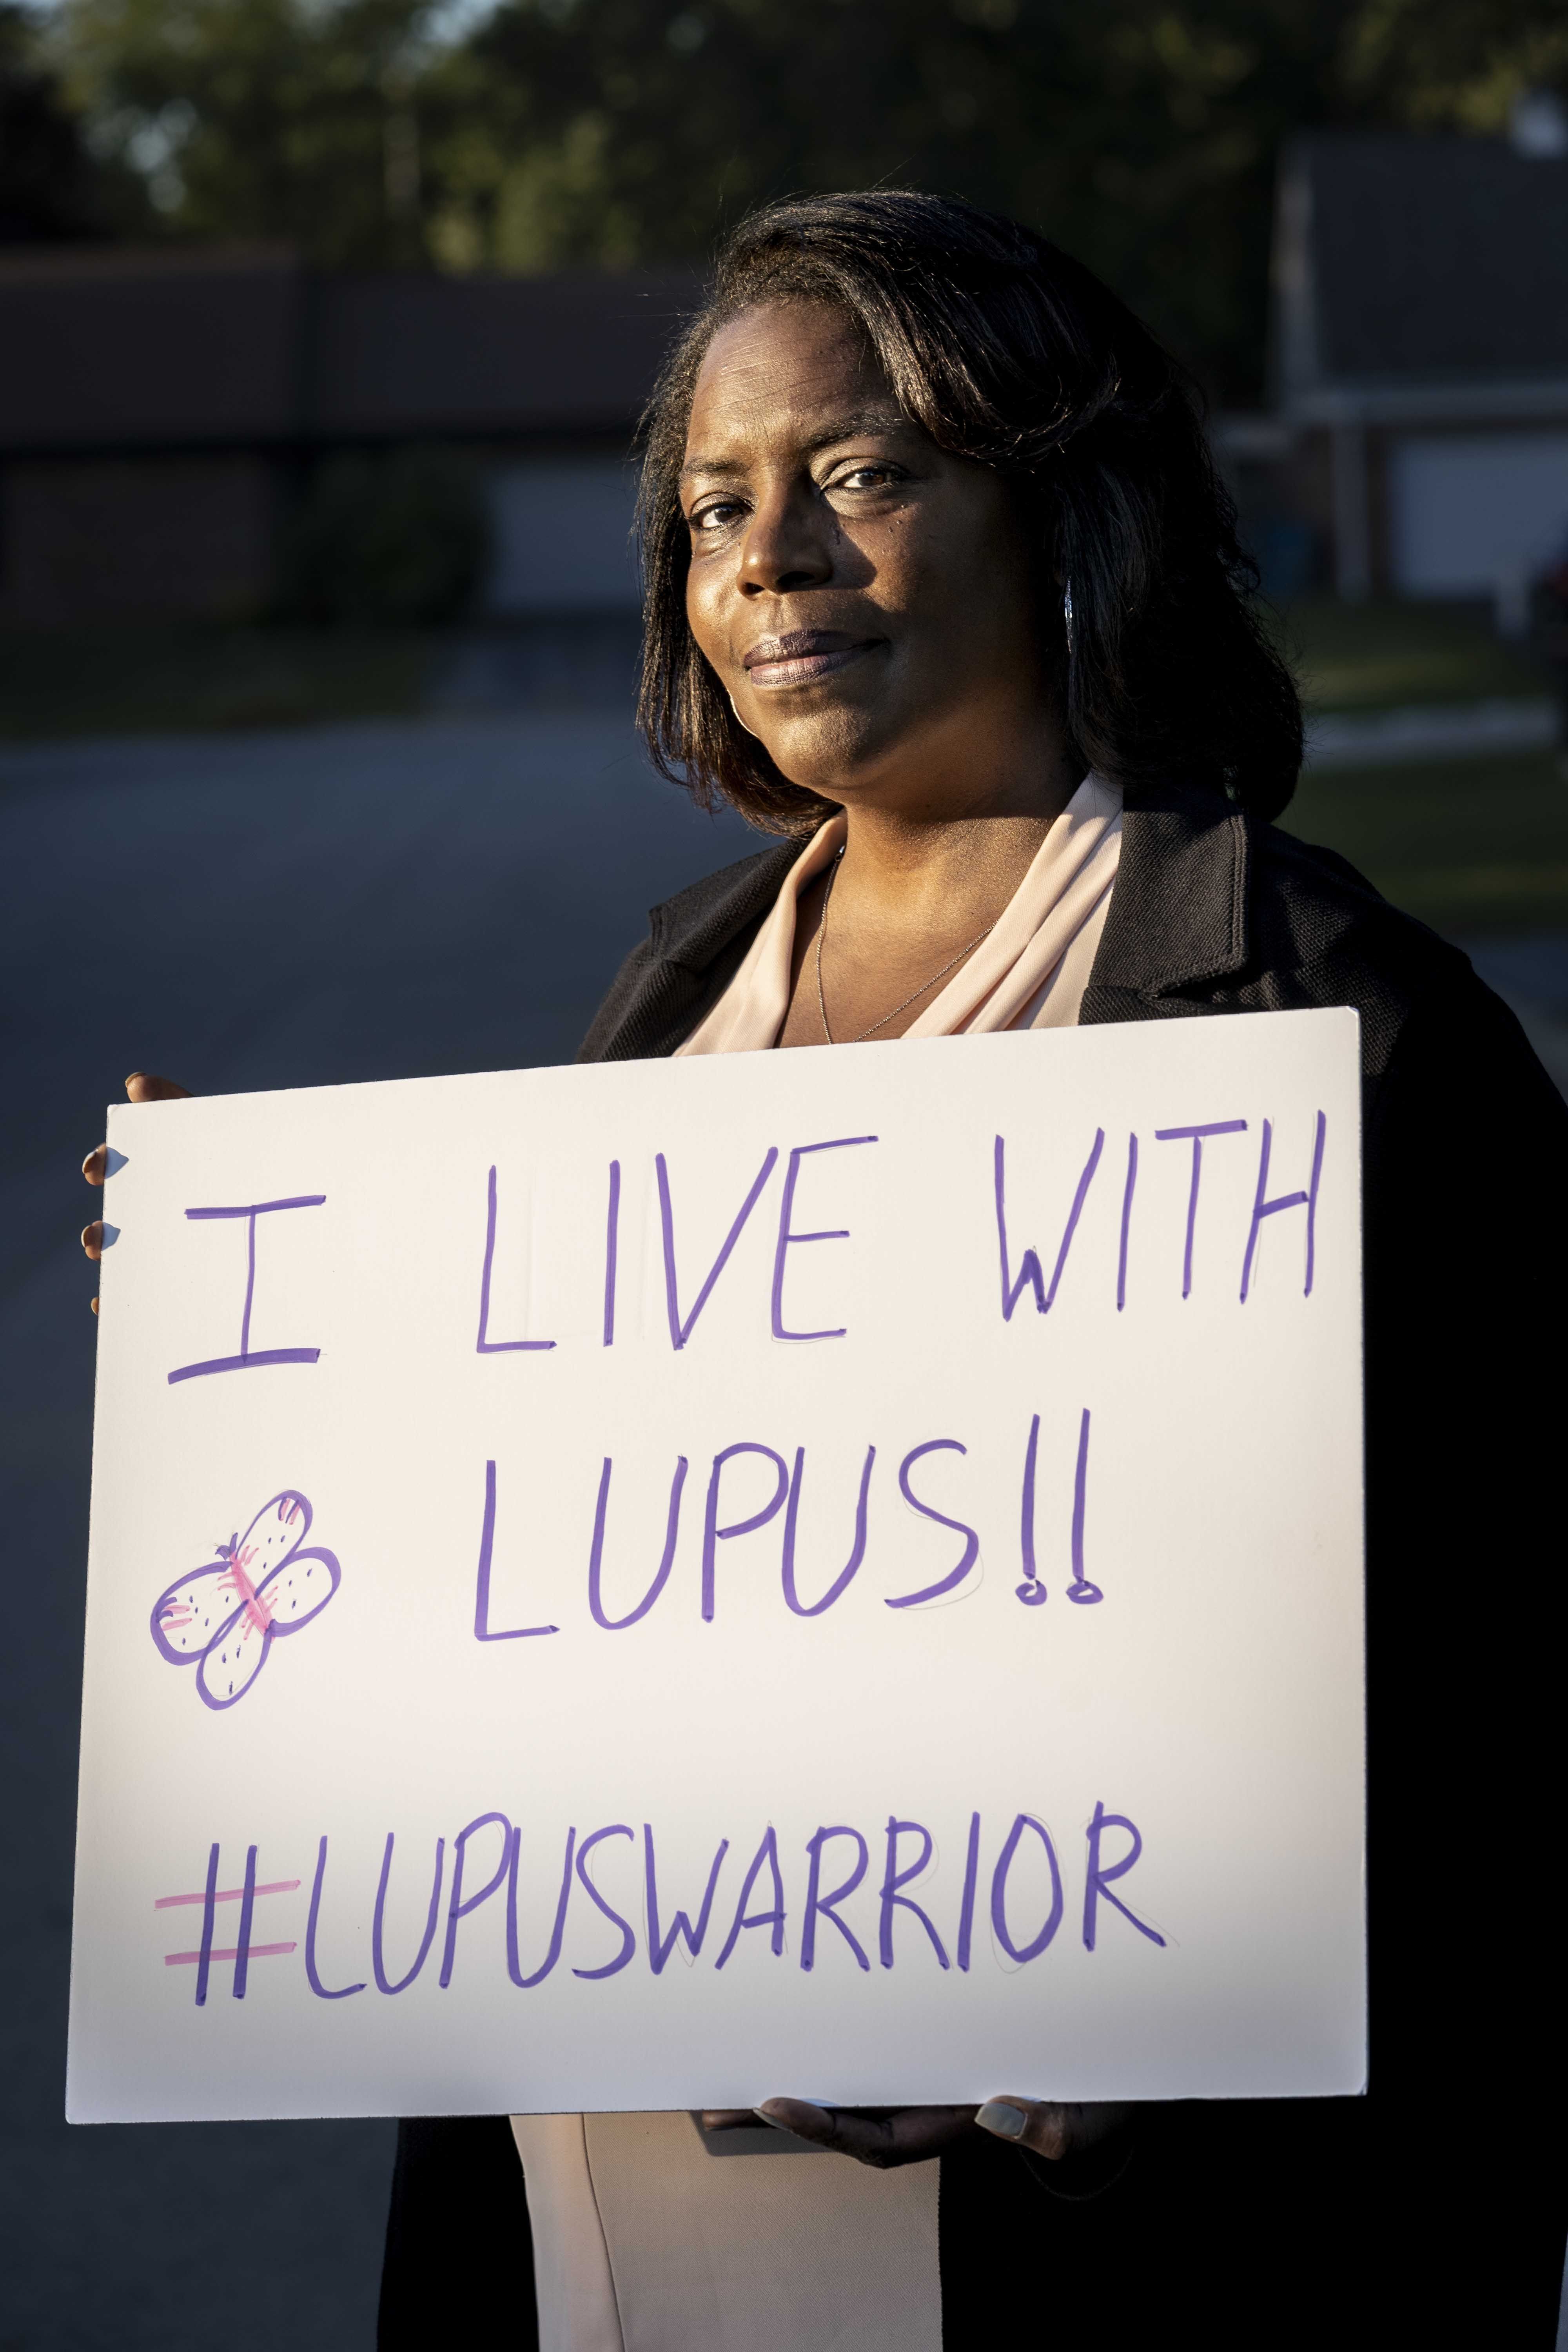 melanie hall at her home in crete, illinois, holding a white sign that has the hashtag lupuswarrior